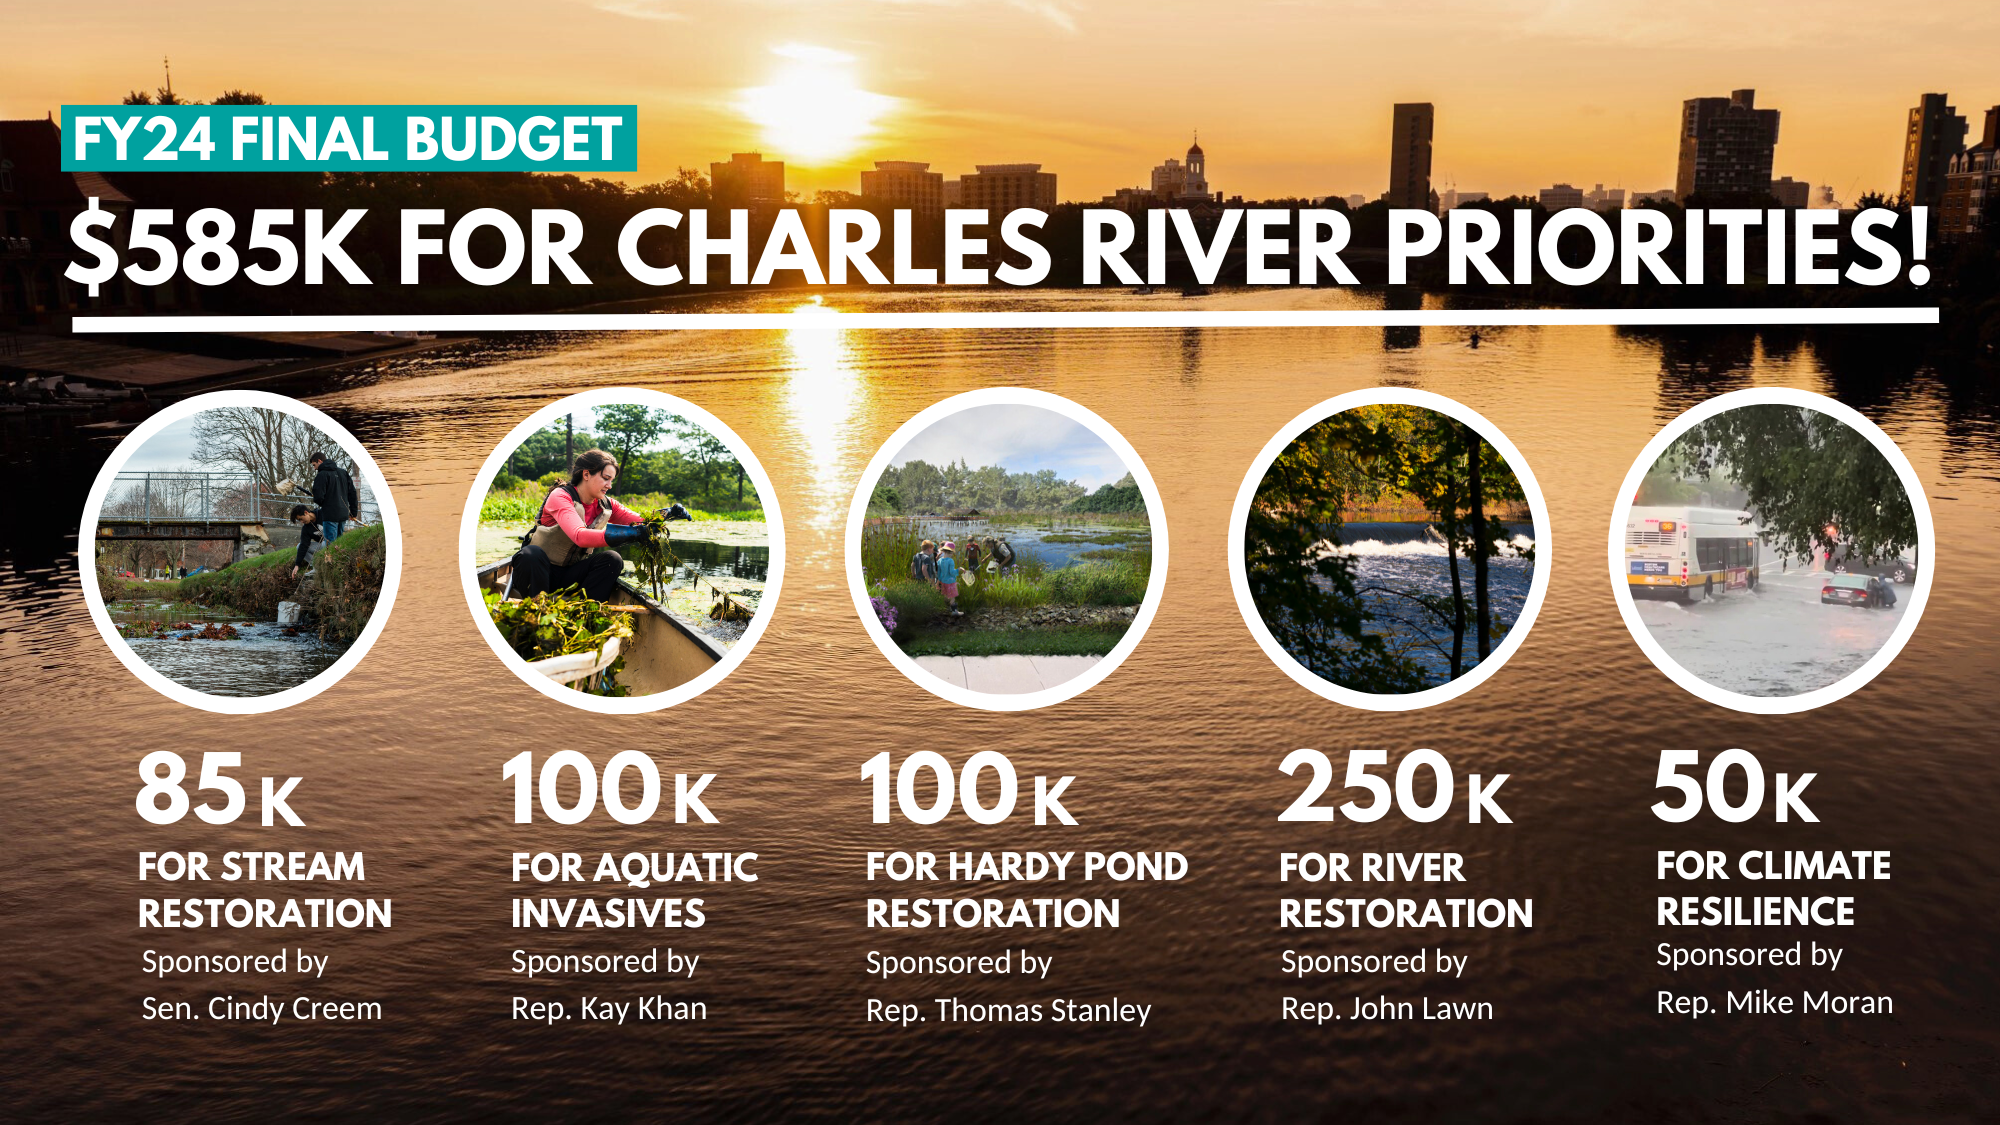 $585K for Charles River Priorities! — Charles River Watershed Association